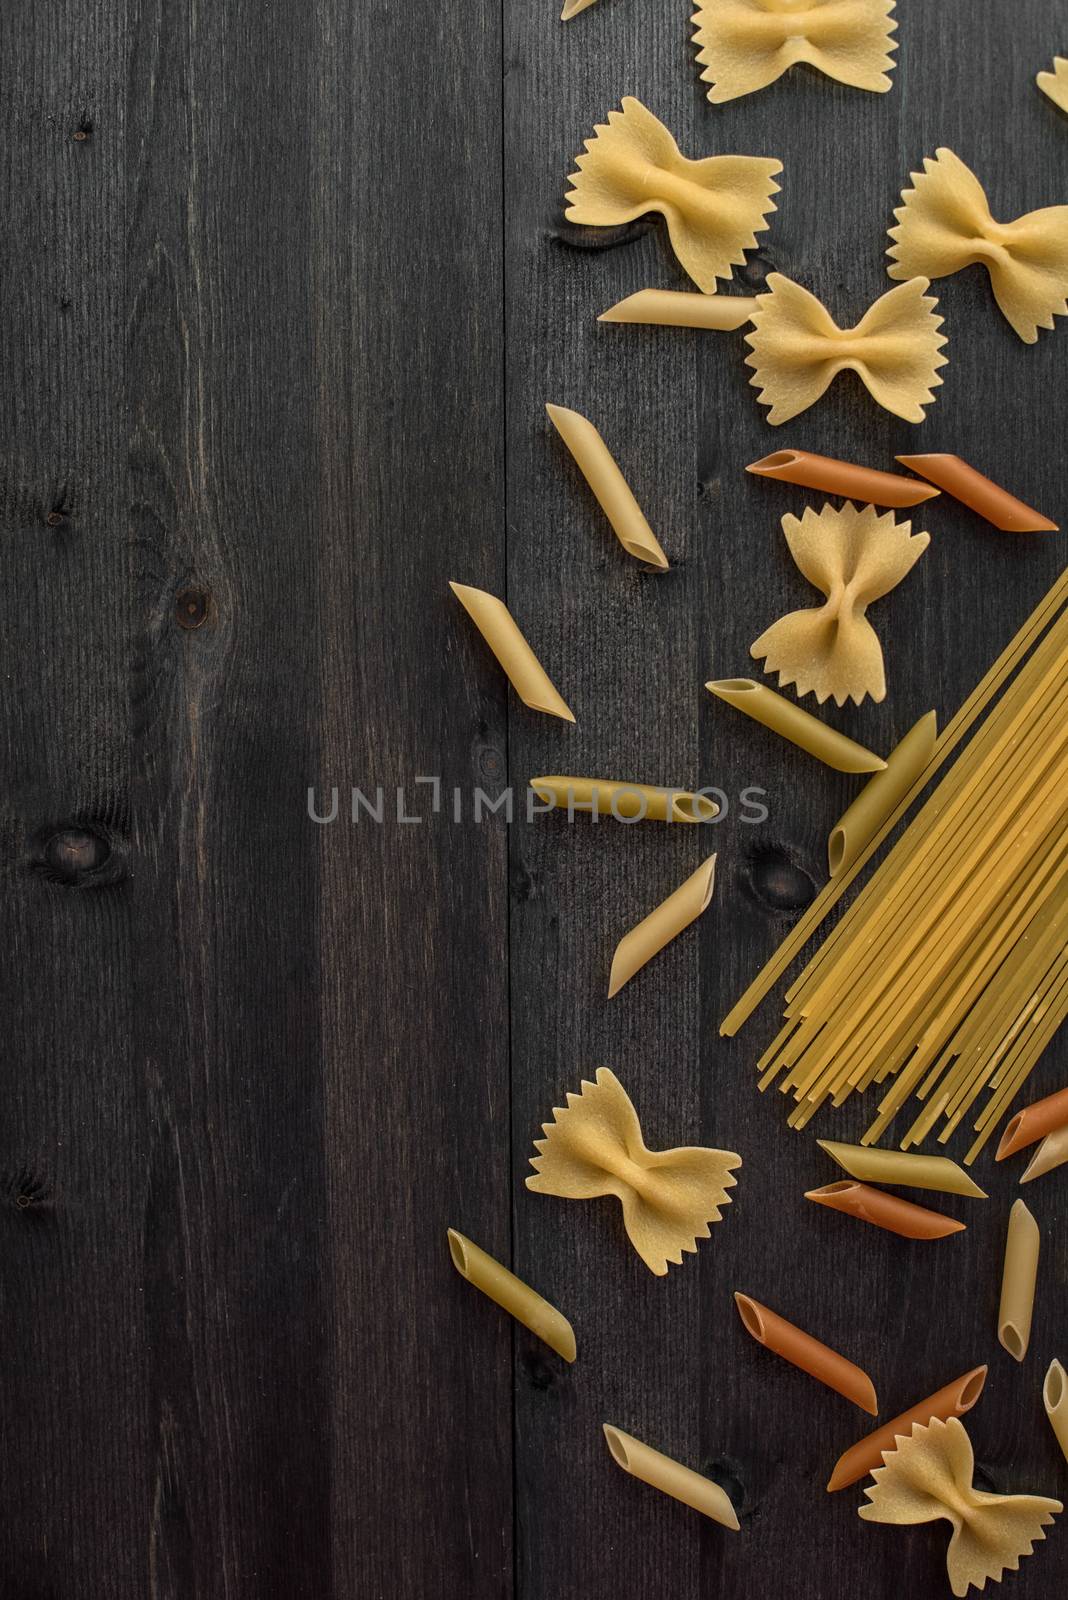 Pasta collection on rustic dark wooden background